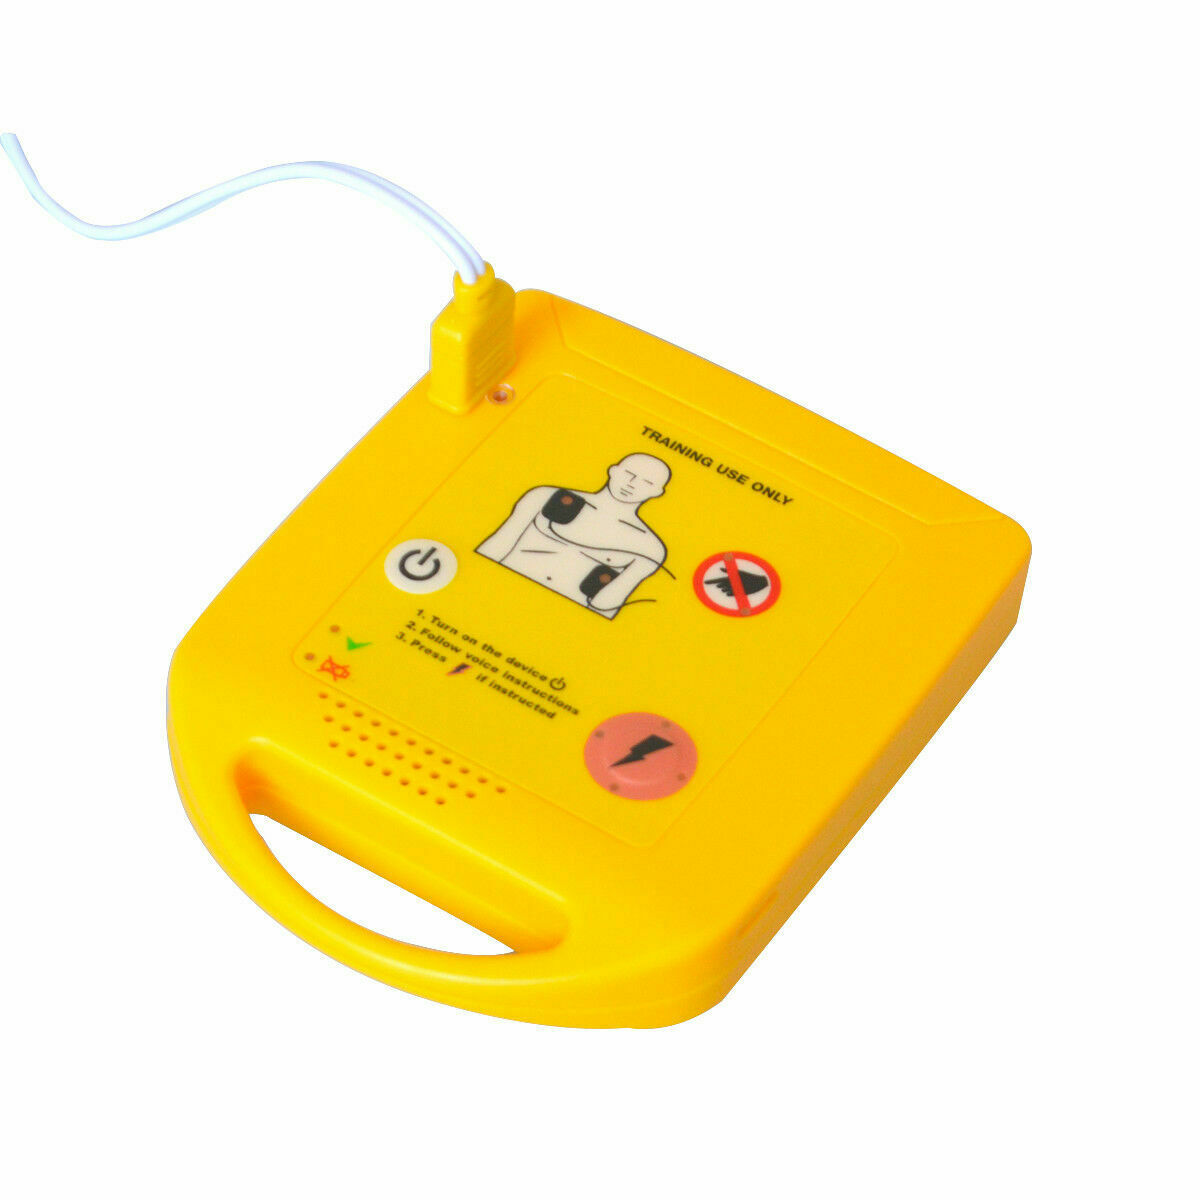 Mini Aed Trainer Xft-d0009 First Aid Train Study Device Training Machine Pads Ce